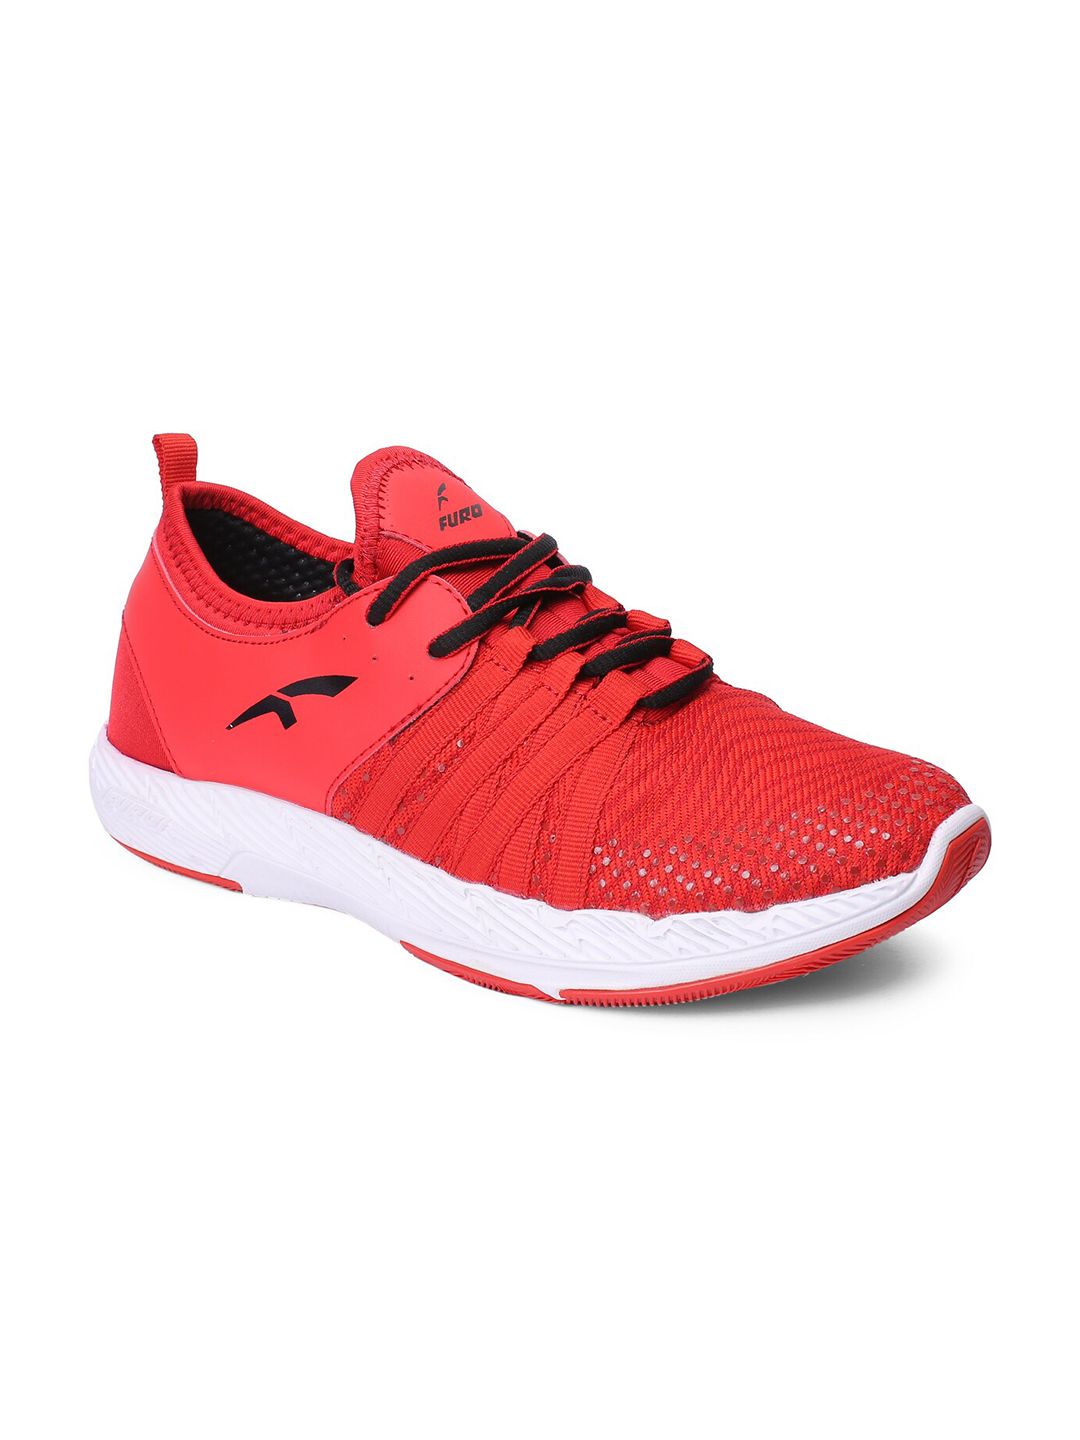 FURO by Red Chief Women Red Running Shoes Price in India